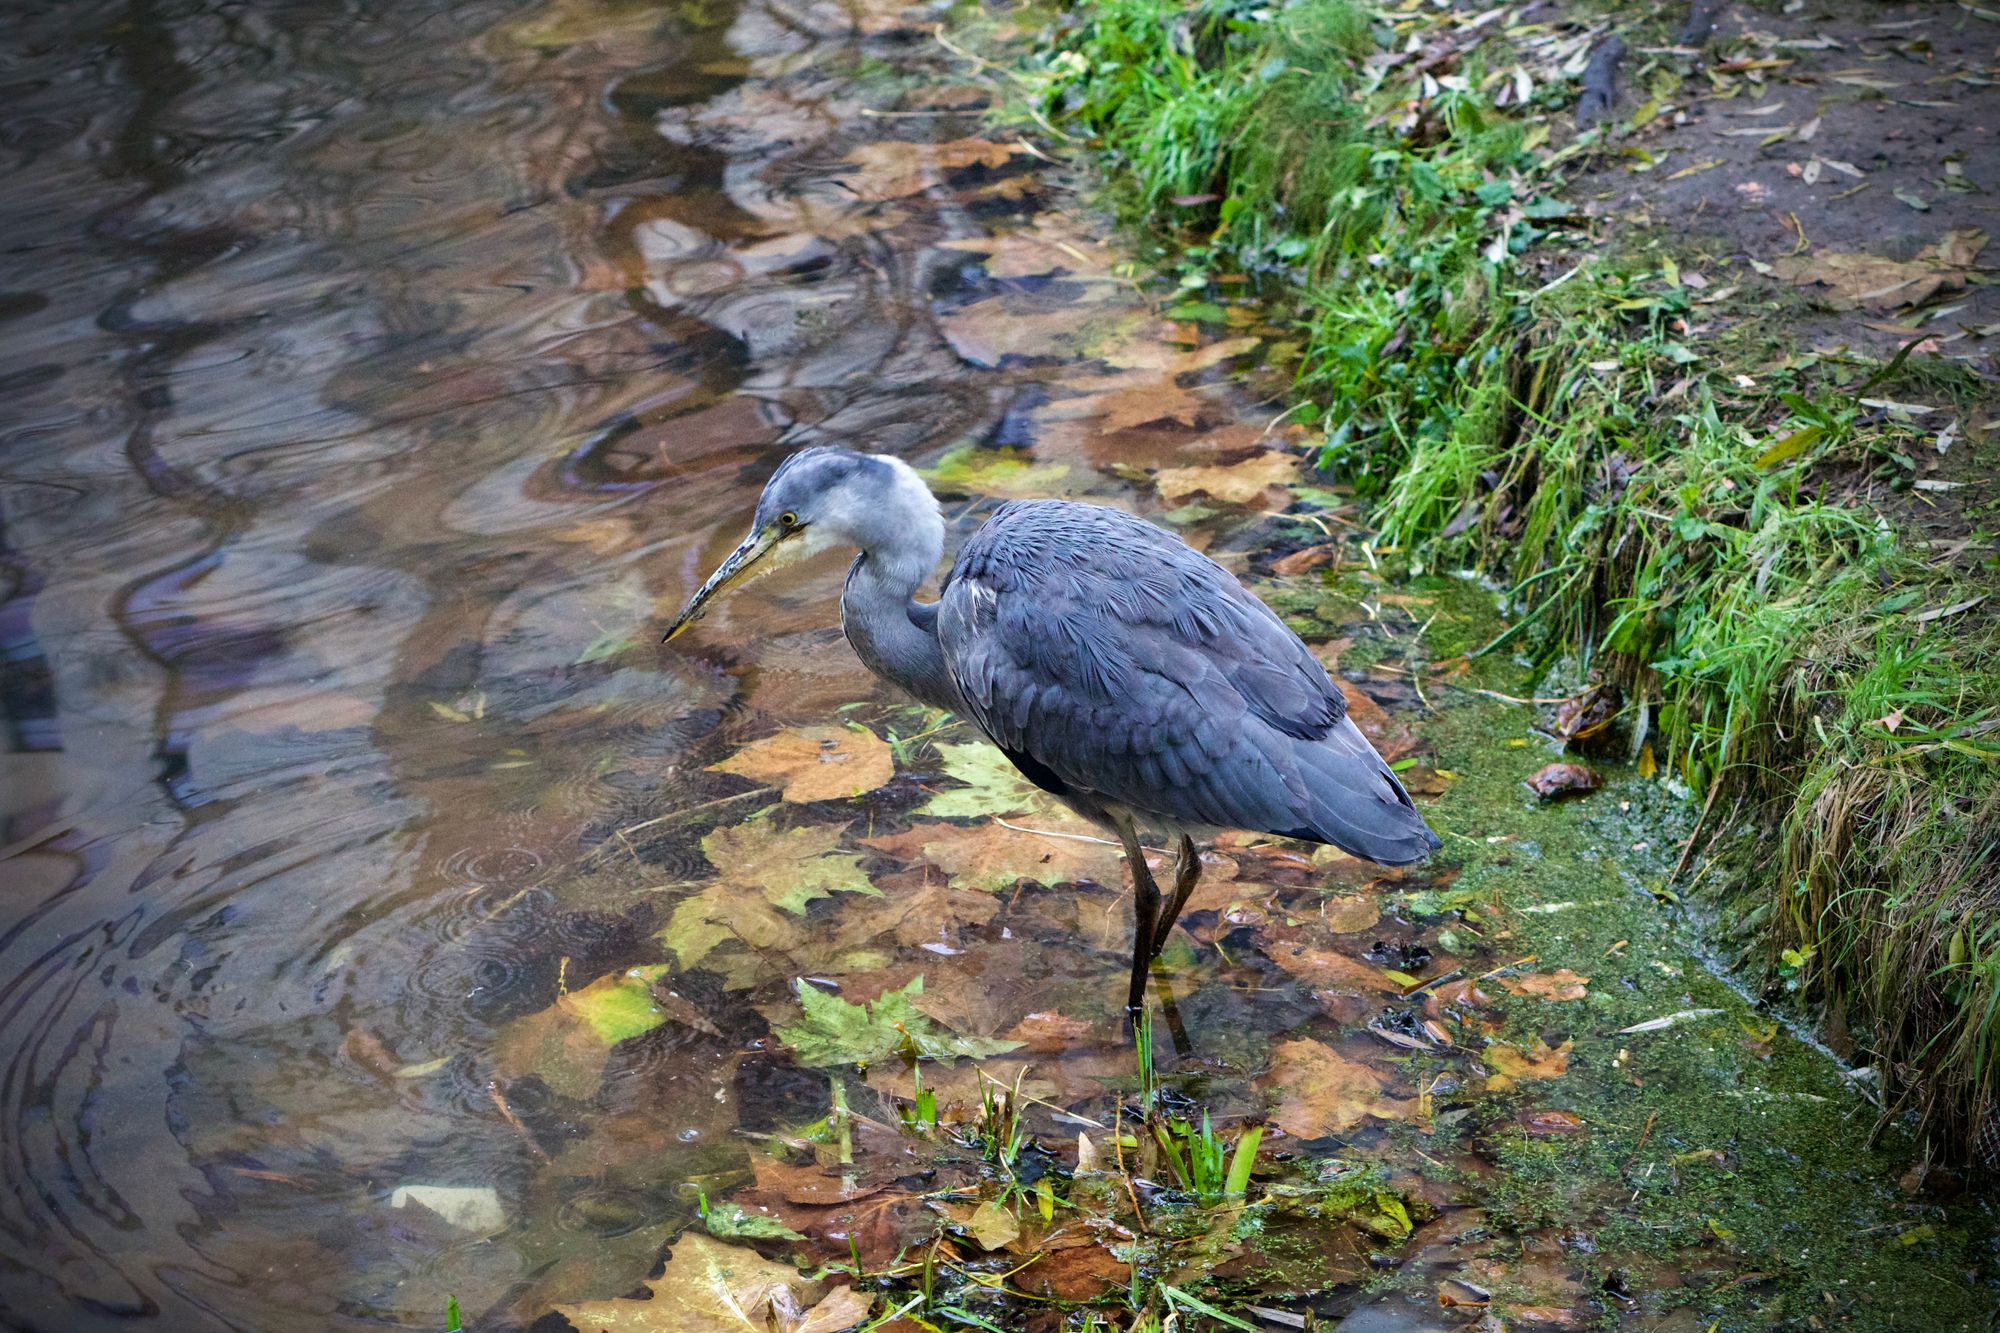 A young heron sits at the edge of a pond, their beak dripping with water.